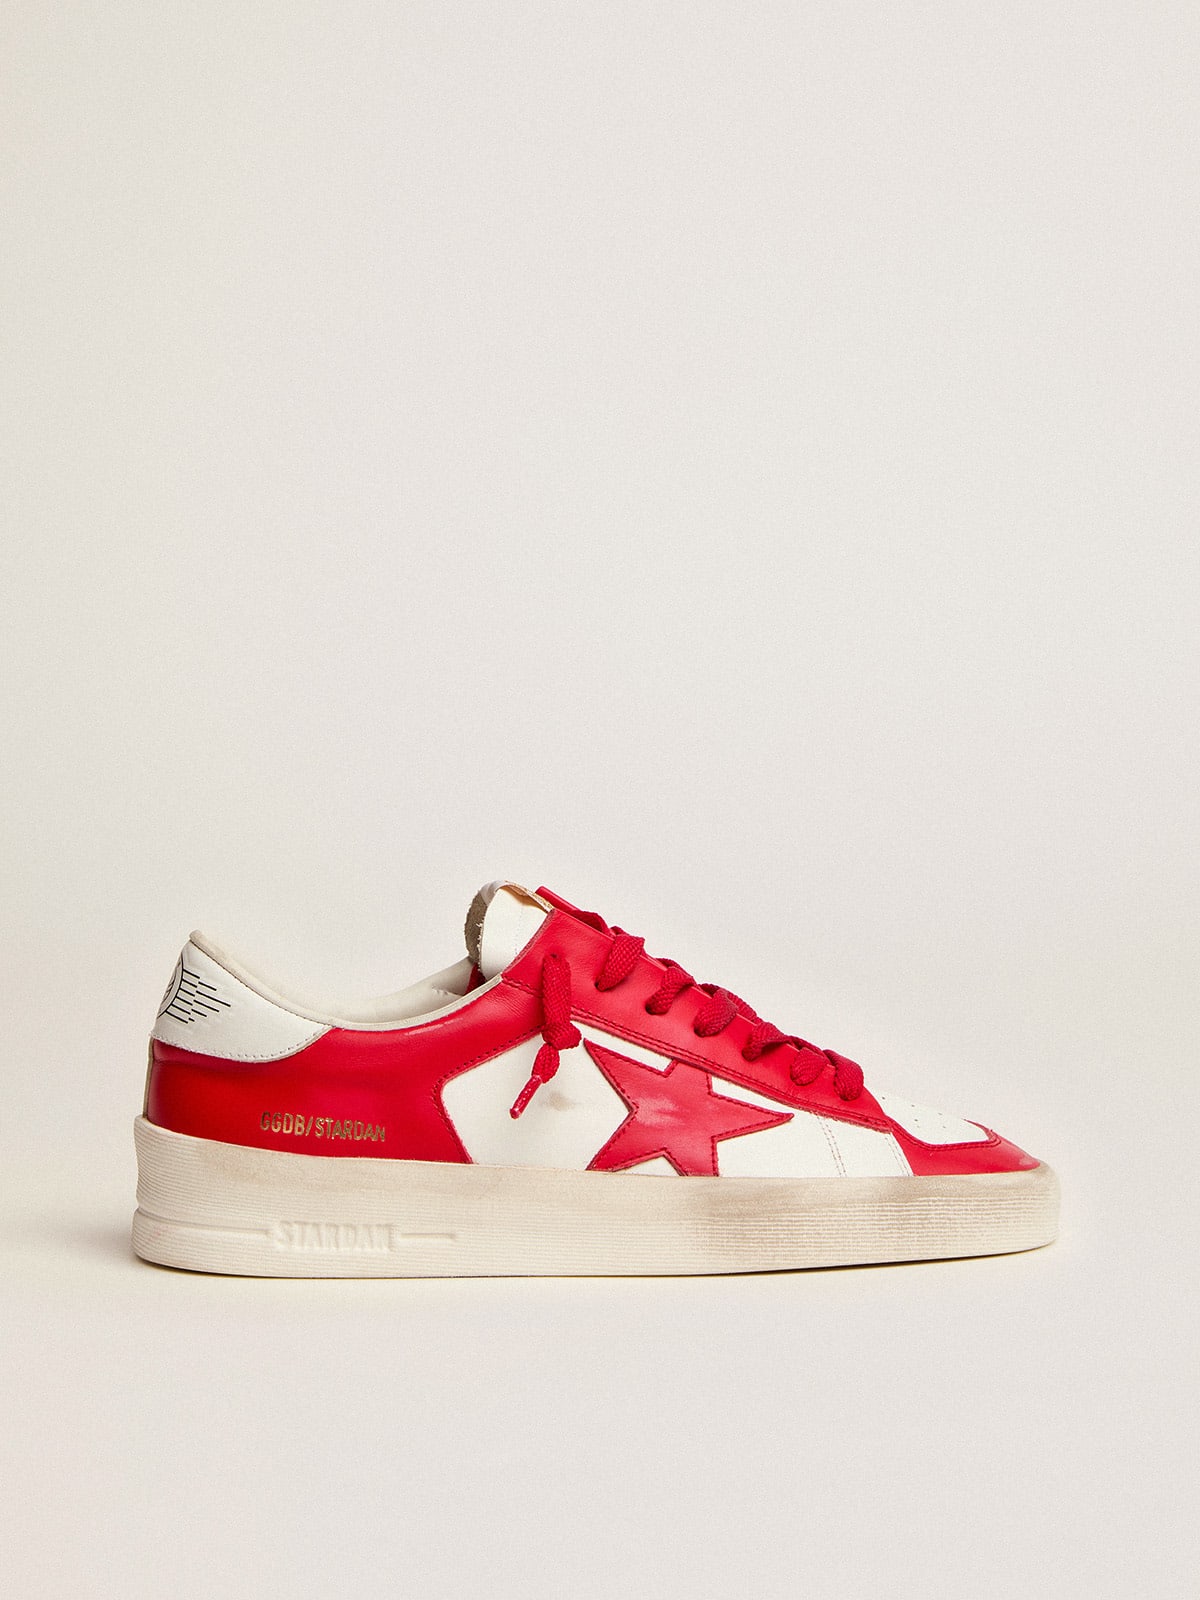 Women's Stardan sneakers in red and white leather